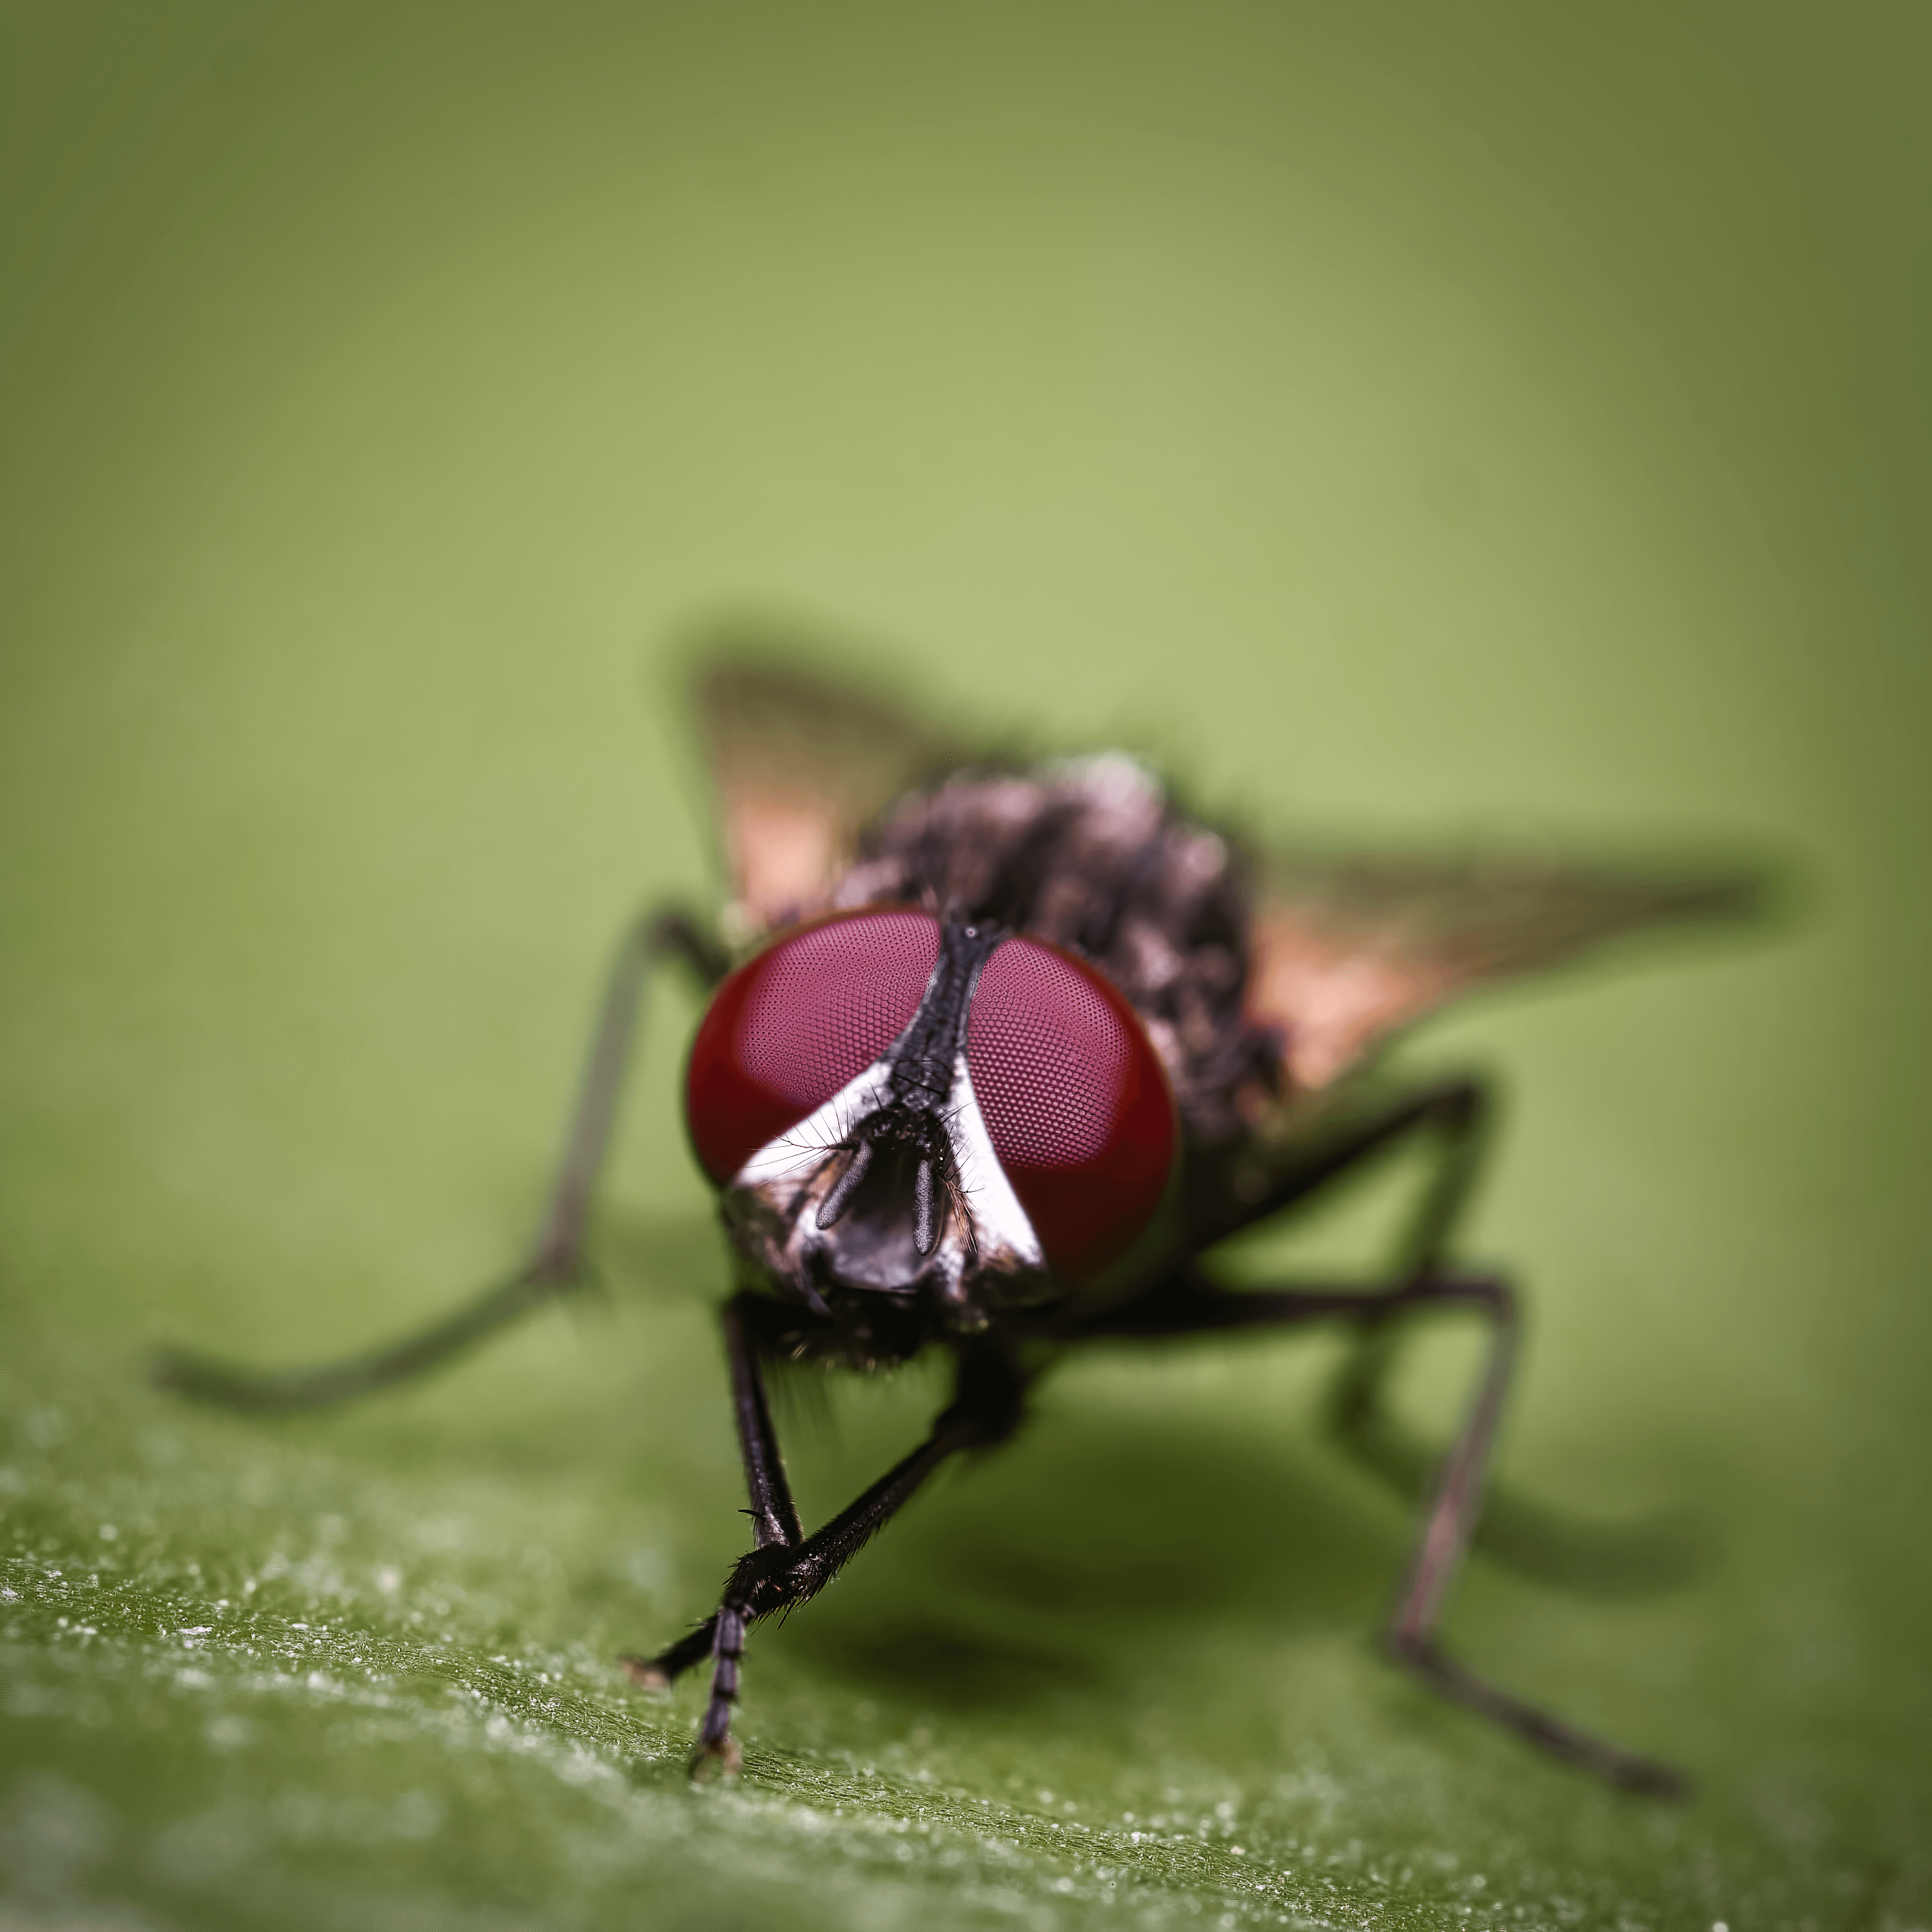 insectography #16